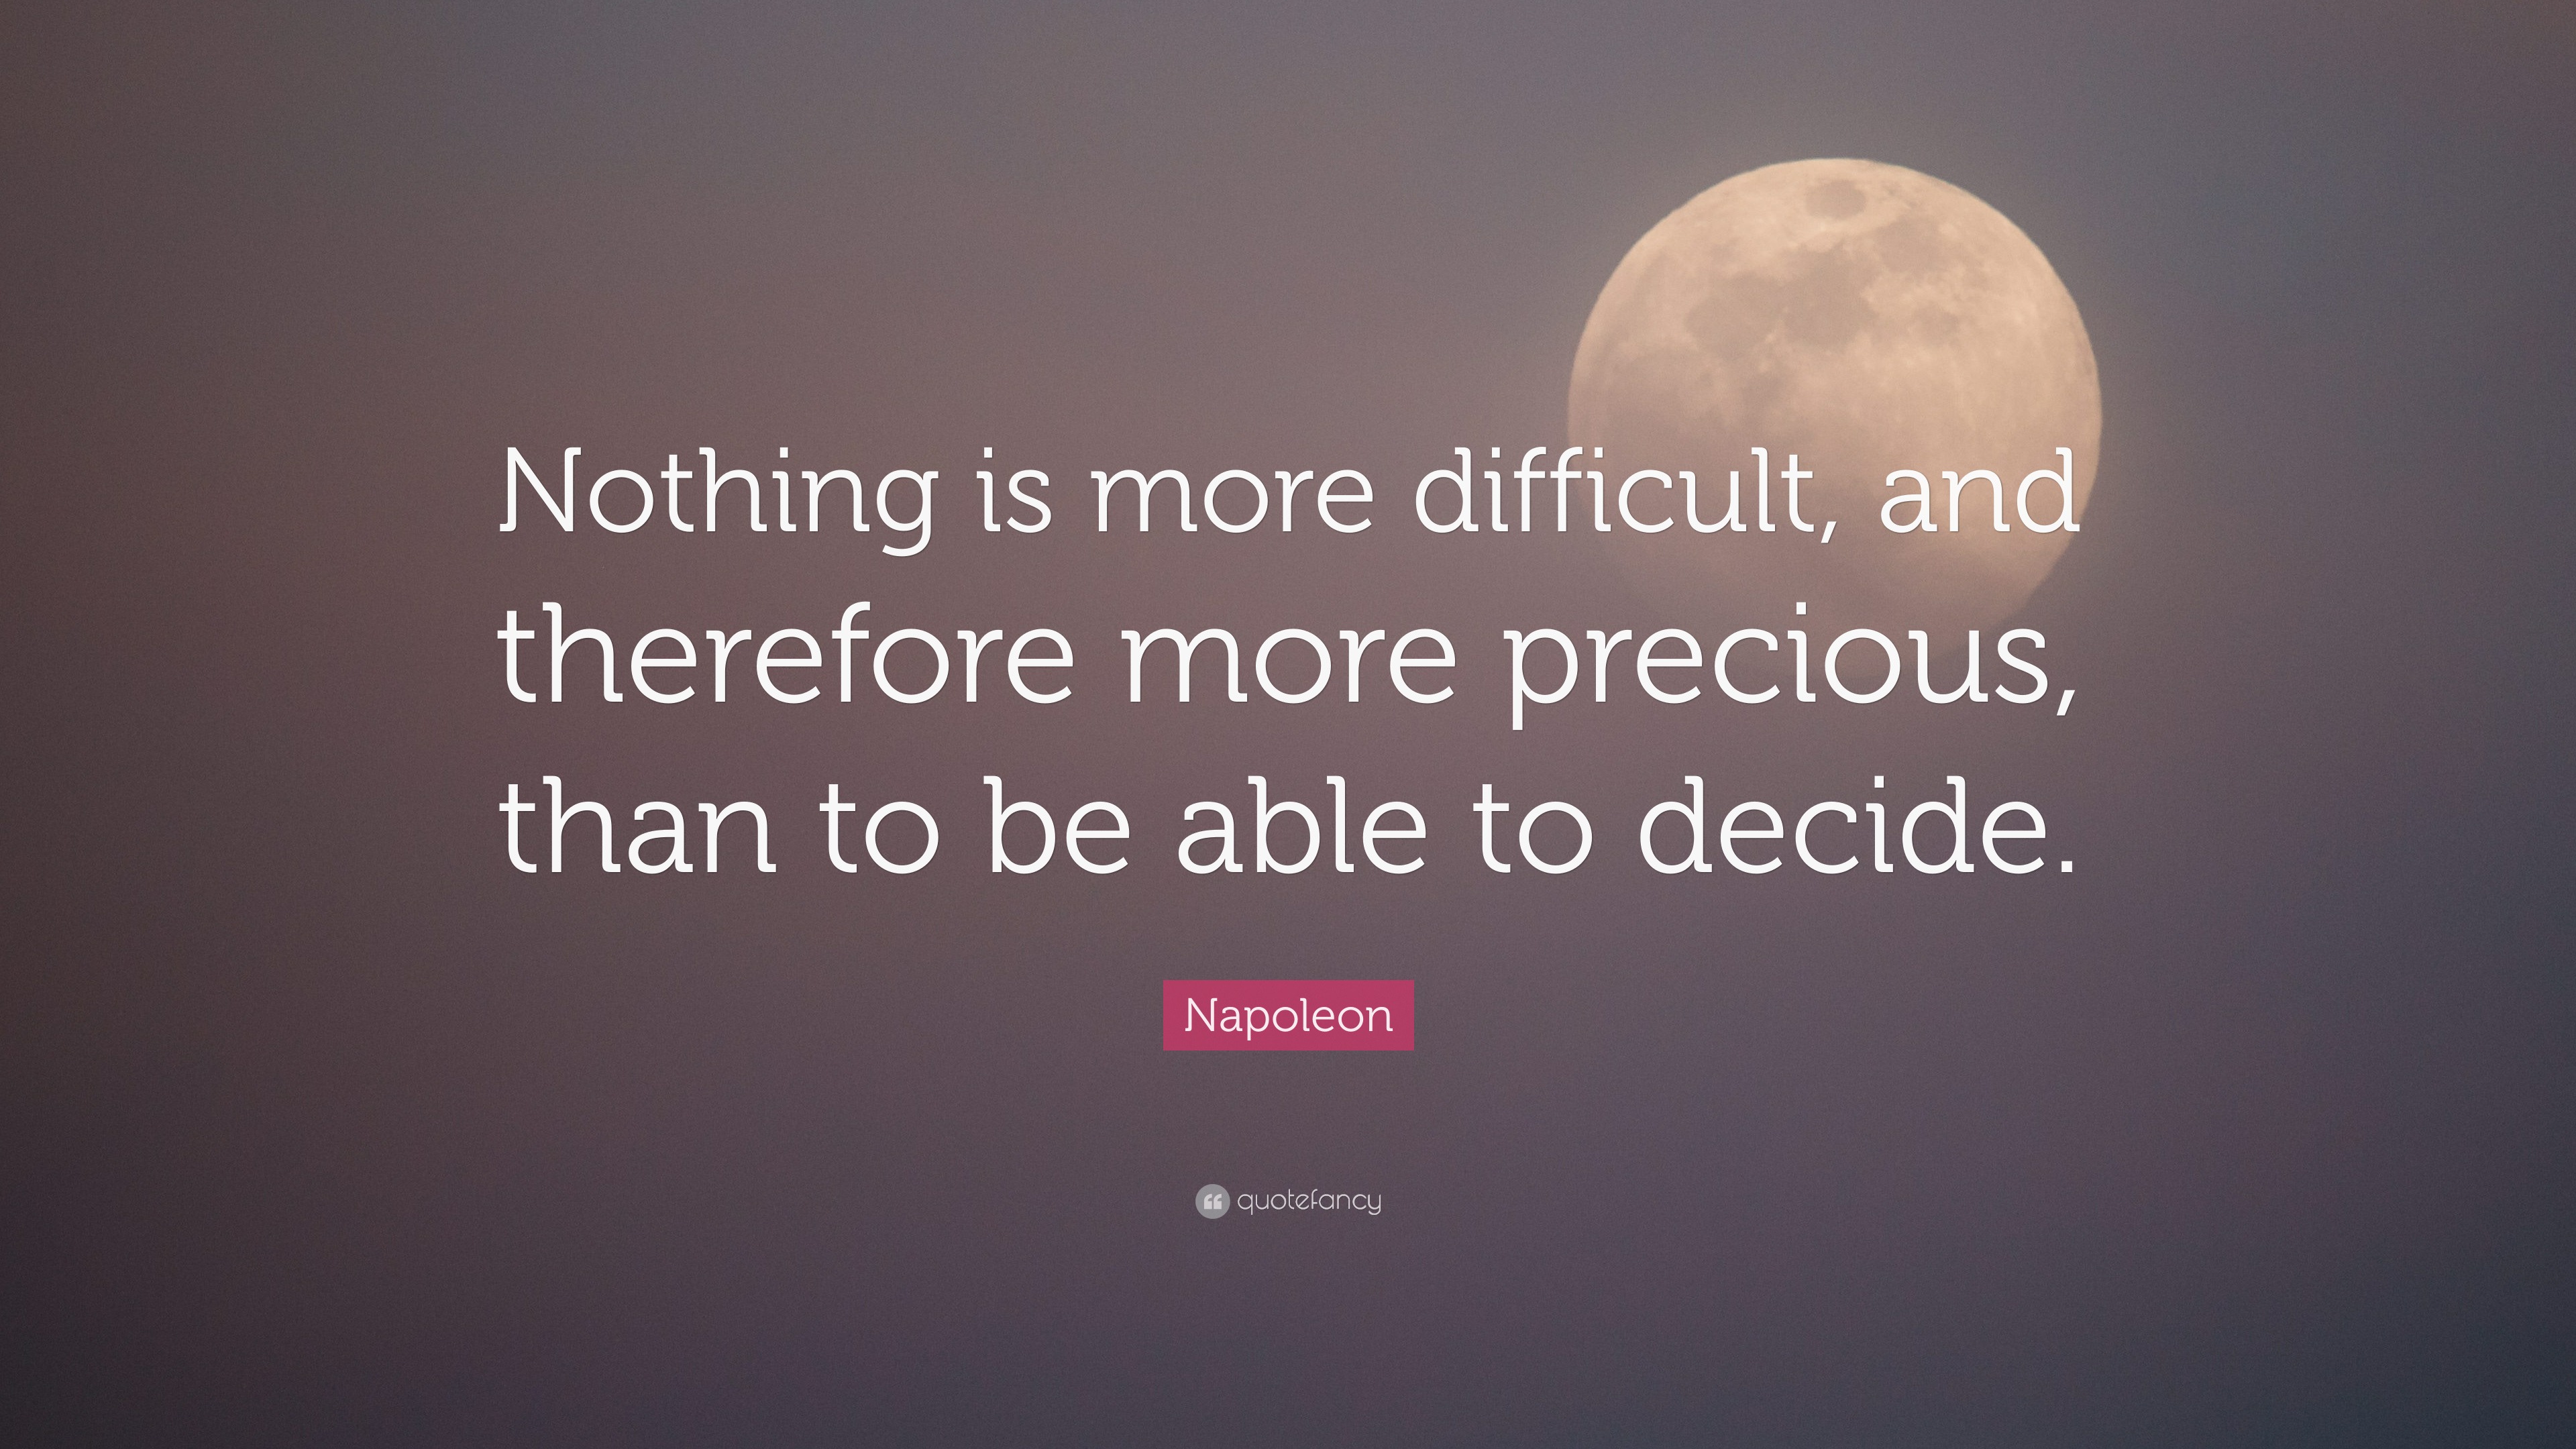 Napoleon Quote: “Nothing is more difficult, and therefore more precious ...